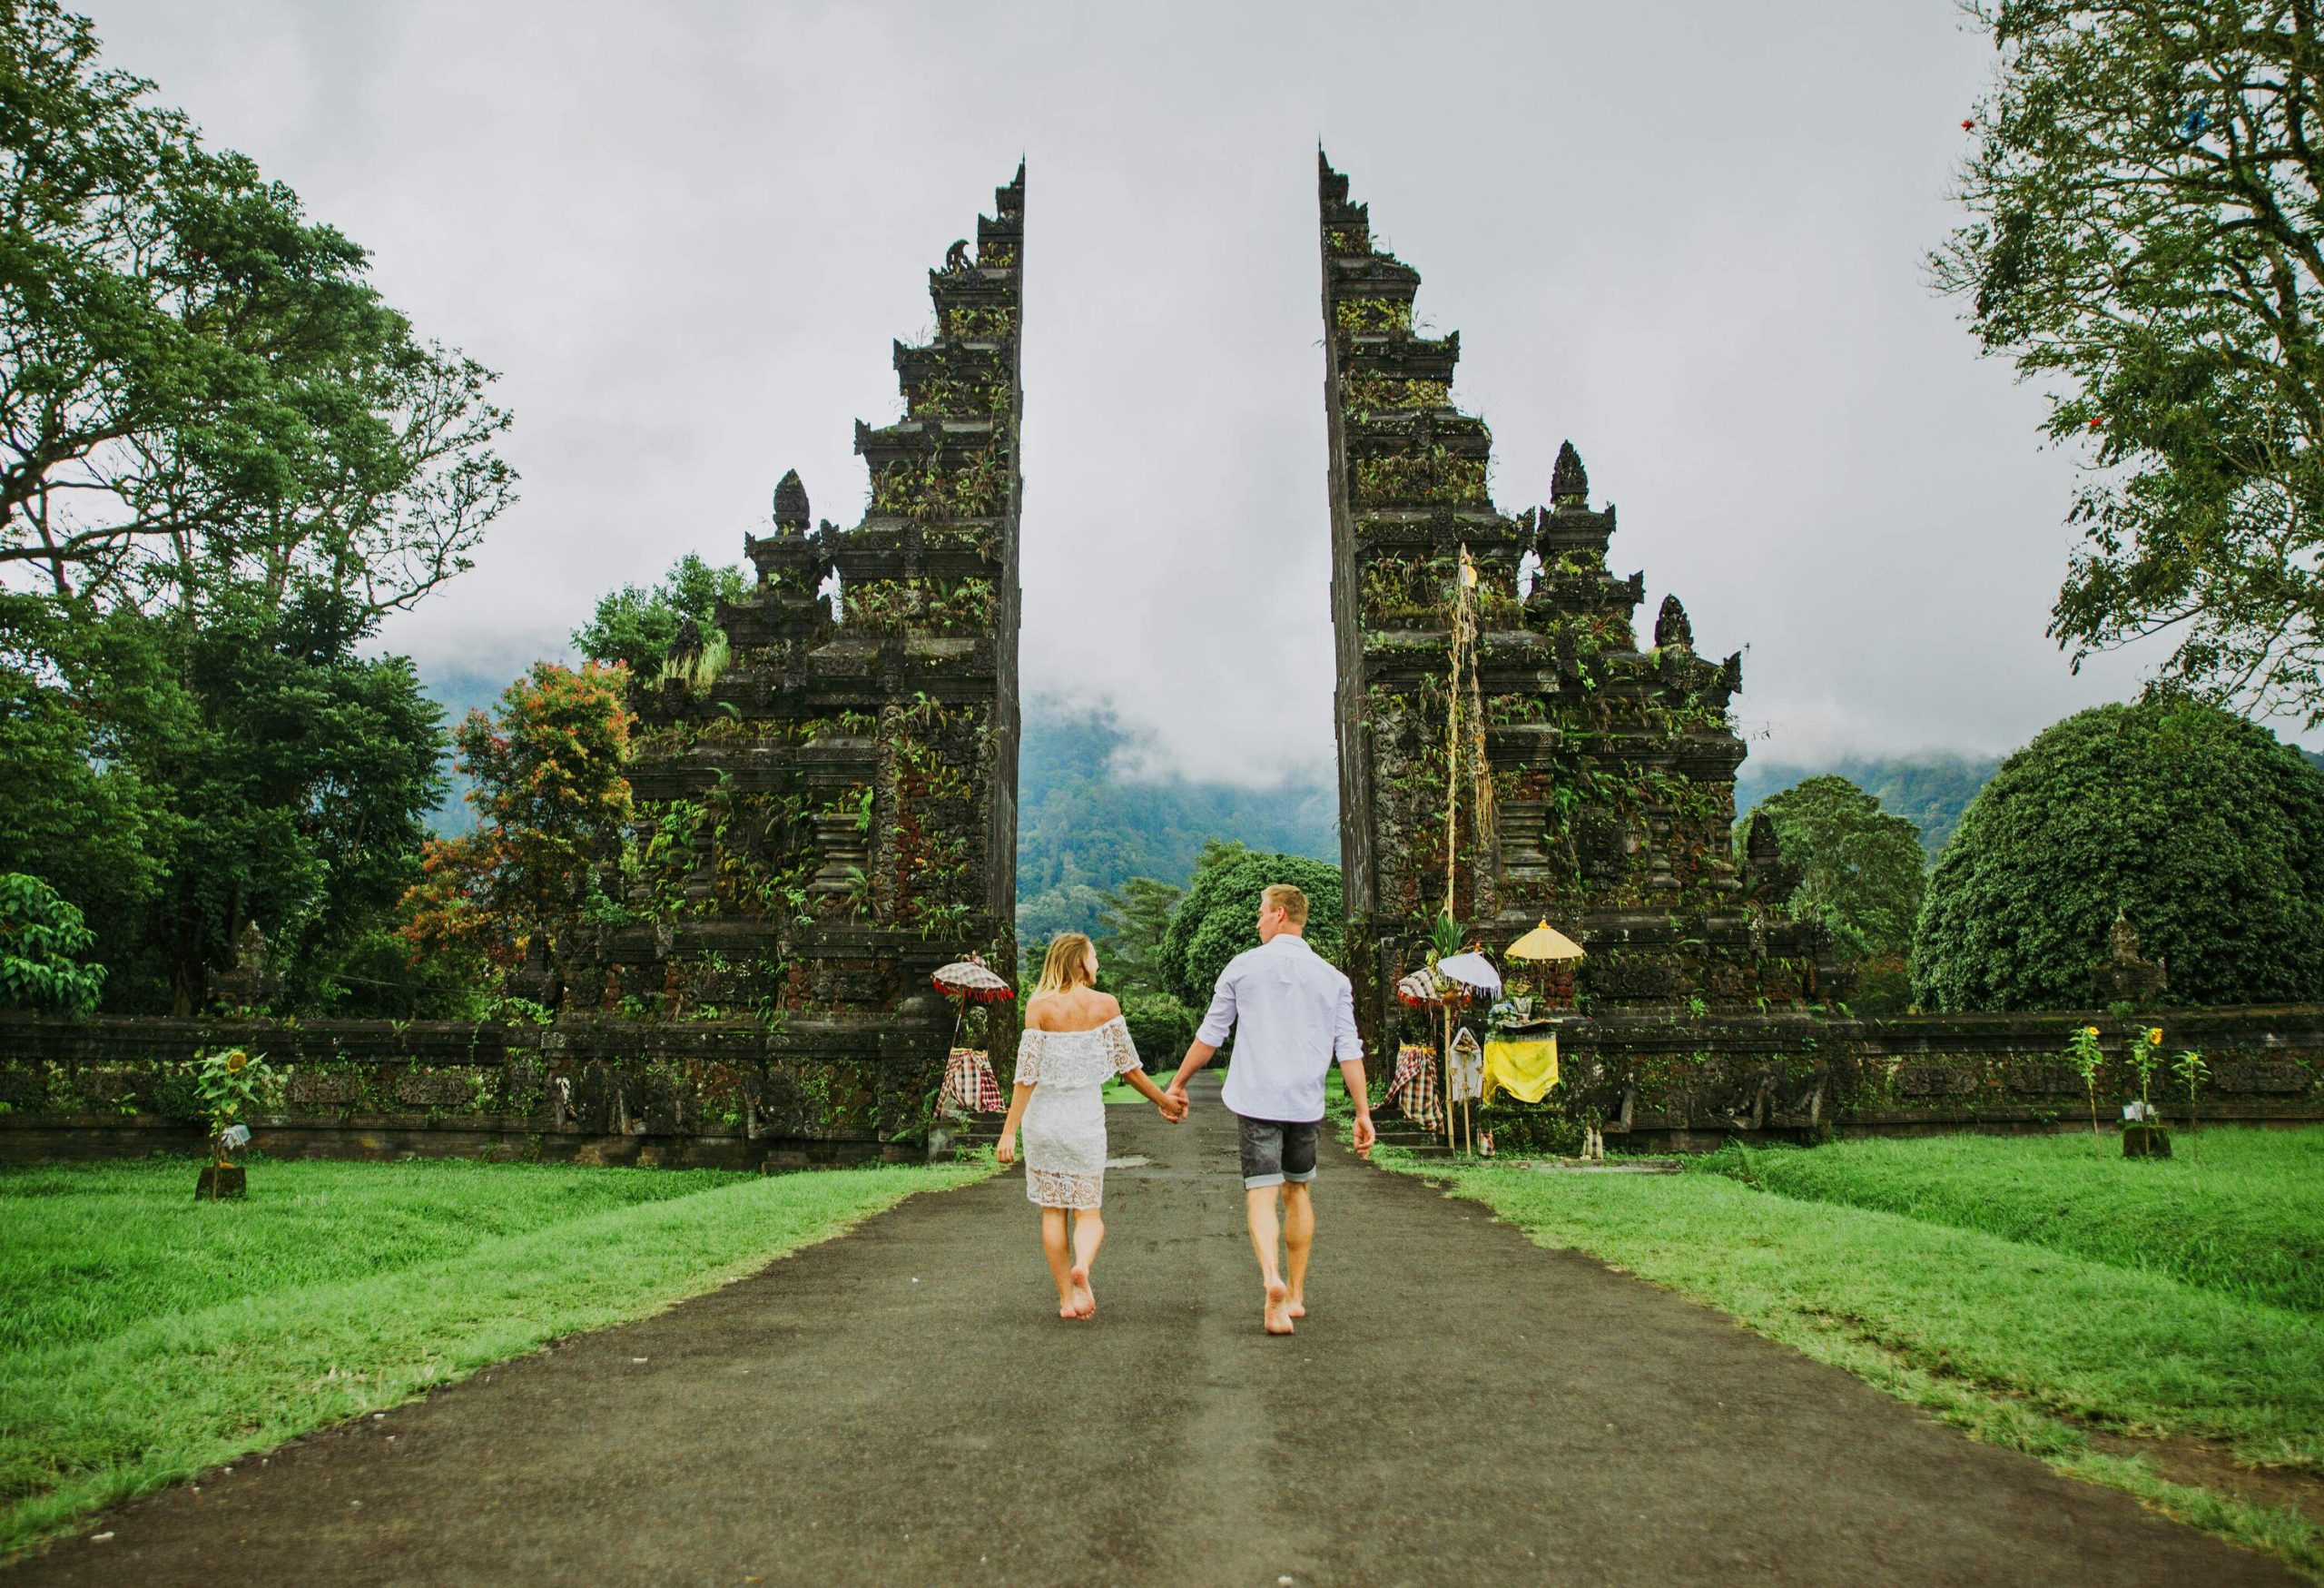 Couples walk hand in hand into the Handara Gate, a classic Javanese-Bali split gate surrounded by lush vegetation.